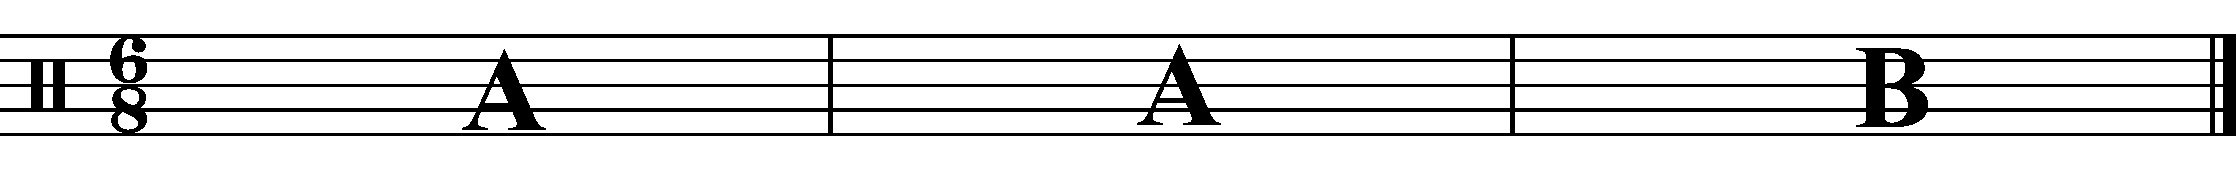 A three bar phrase made up of 2 lots of A followed by a B in the time signature of 6/8.